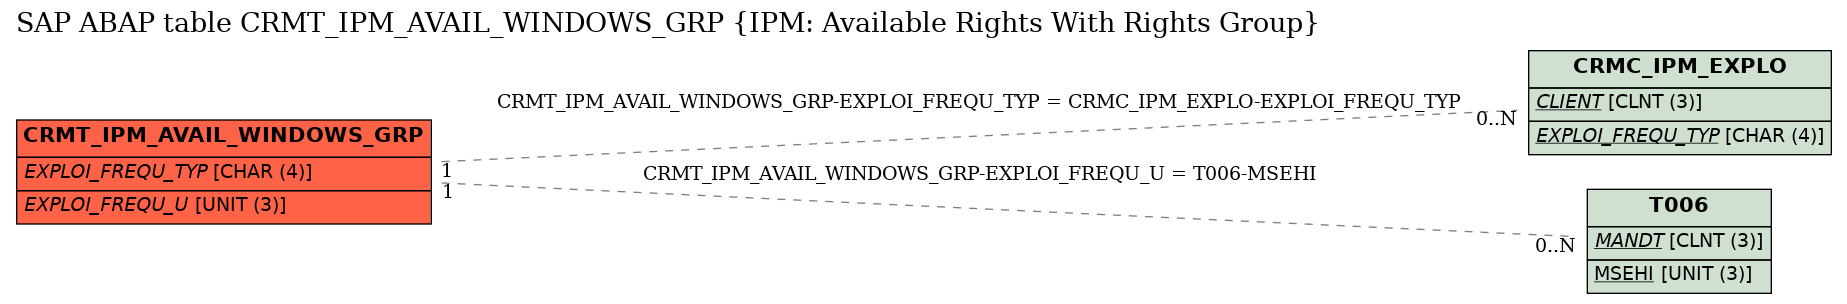 E-R Diagram for table CRMT_IPM_AVAIL_WINDOWS_GRP (IPM: Available Rights With Rights Group)